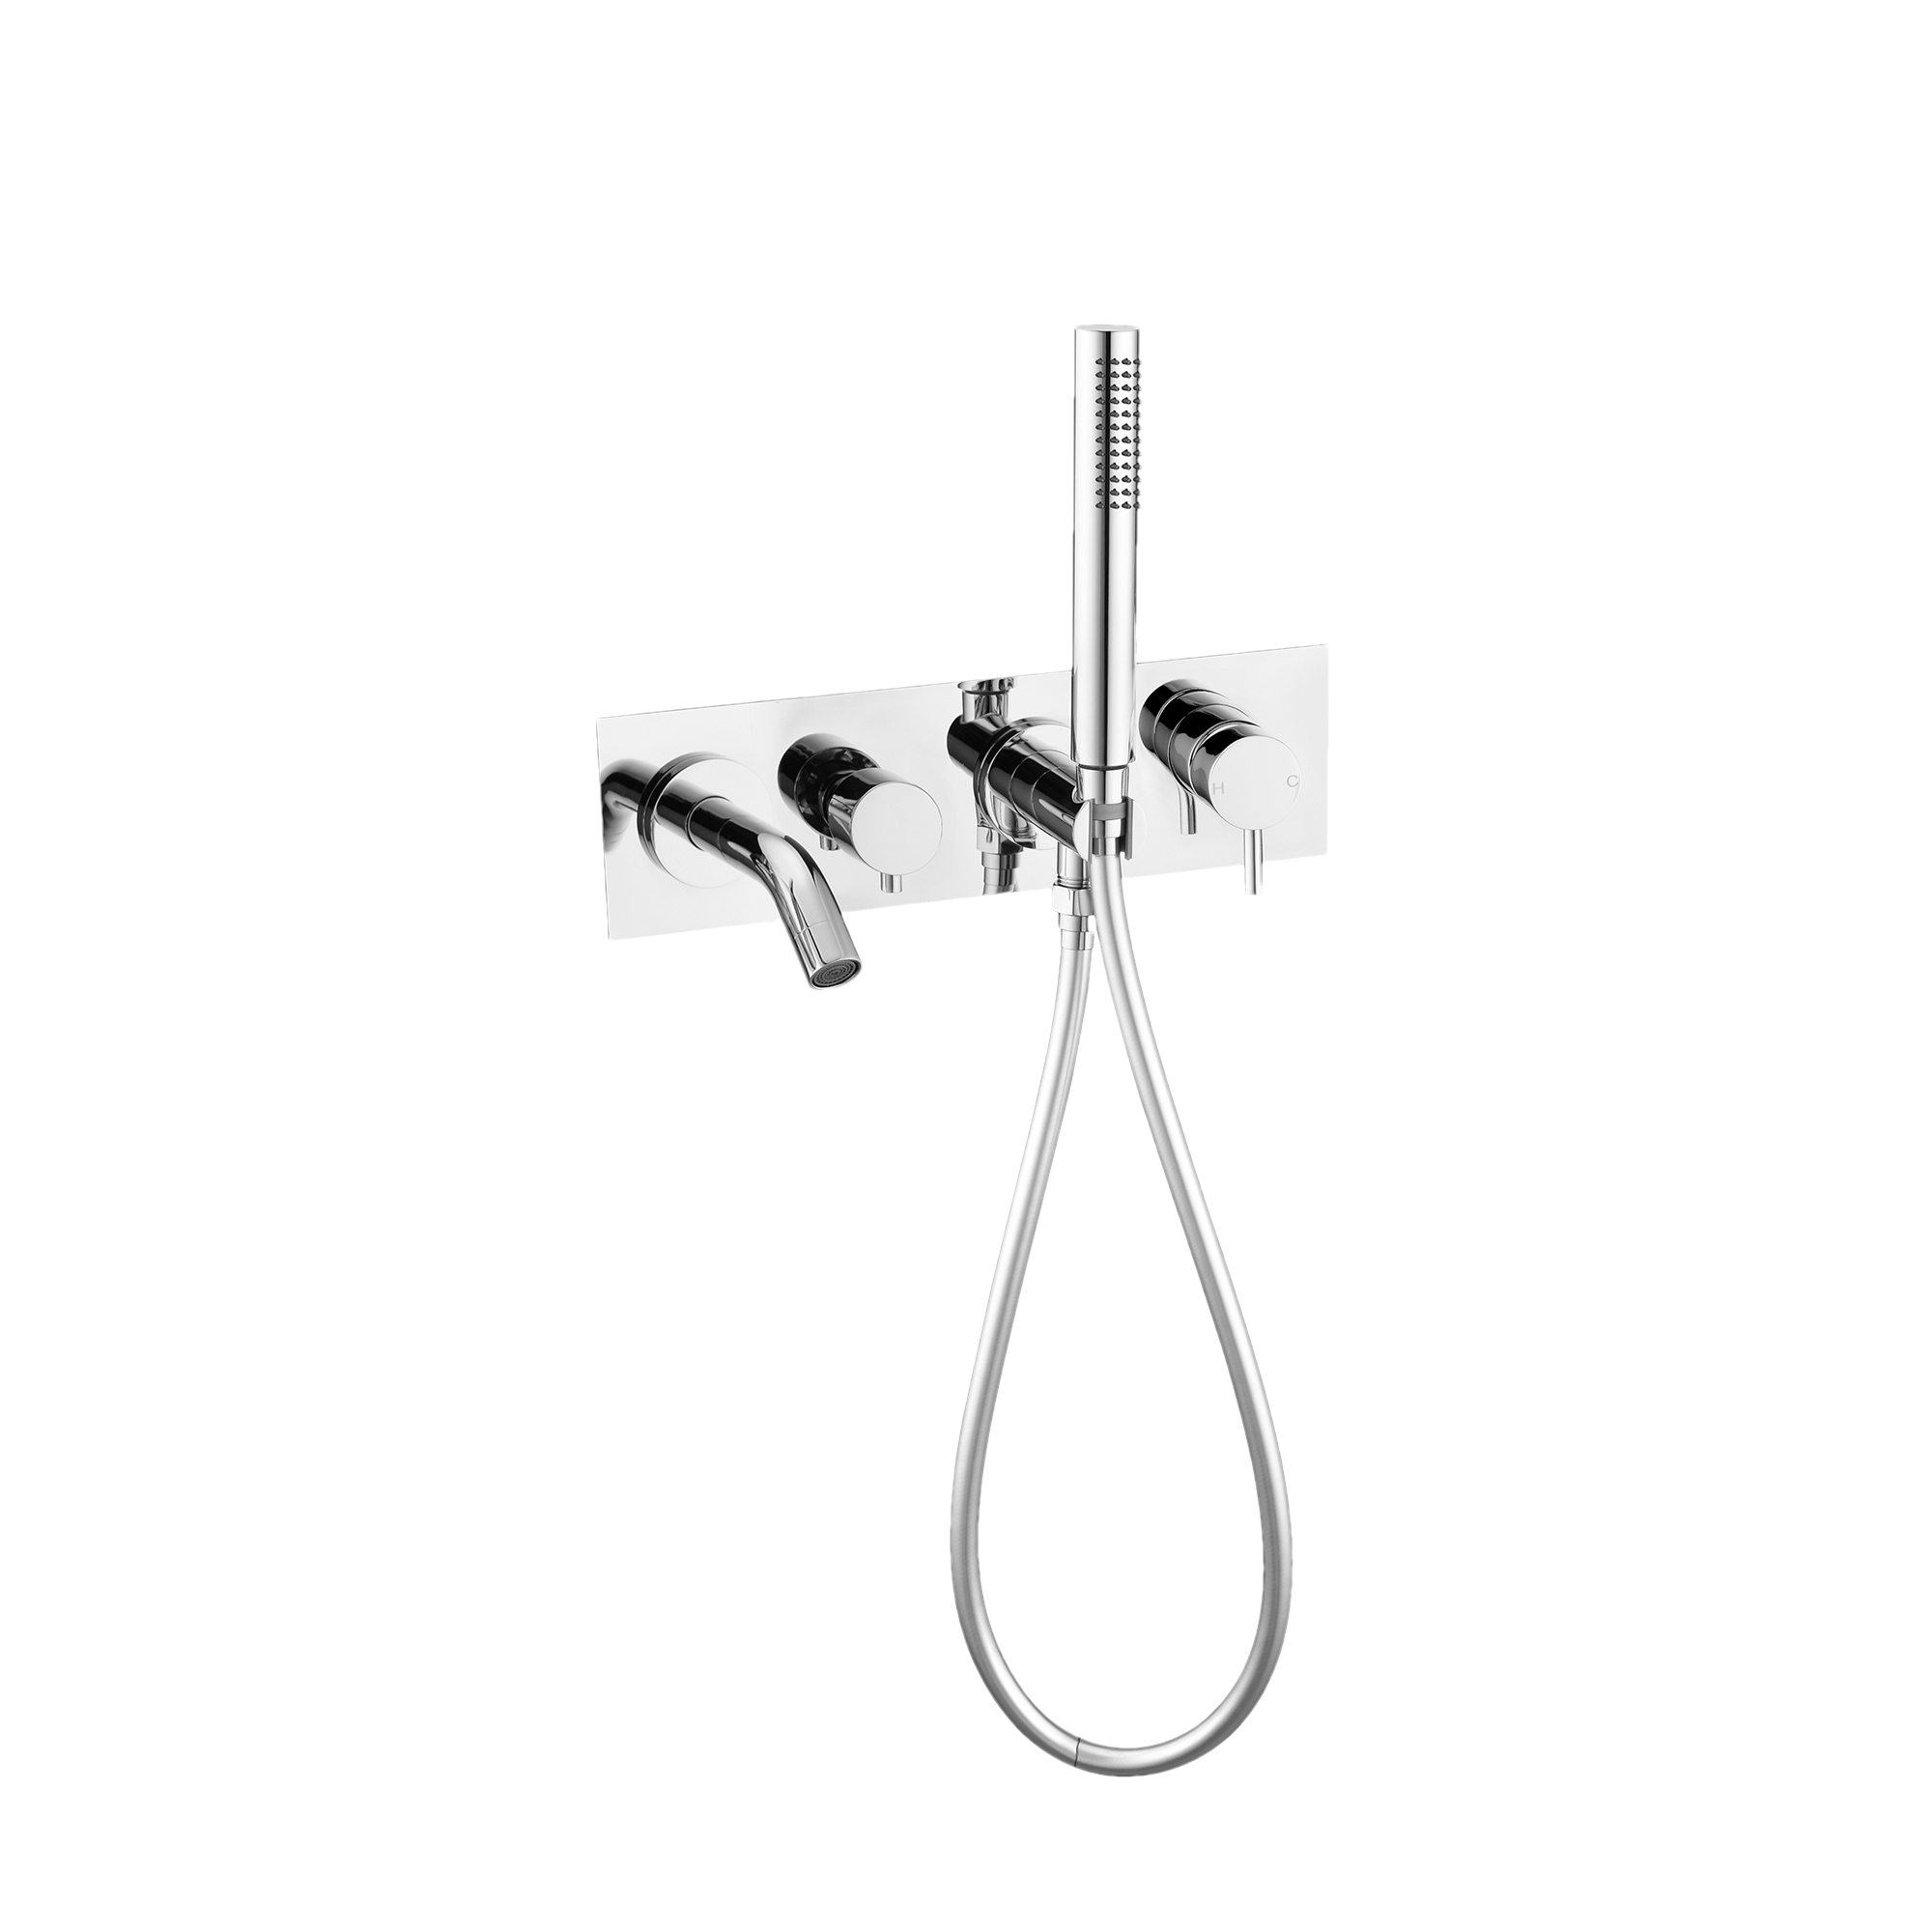 NERO MECCA WALL MOUNT BATH MIXER WITH HAND SHOWER CHROME